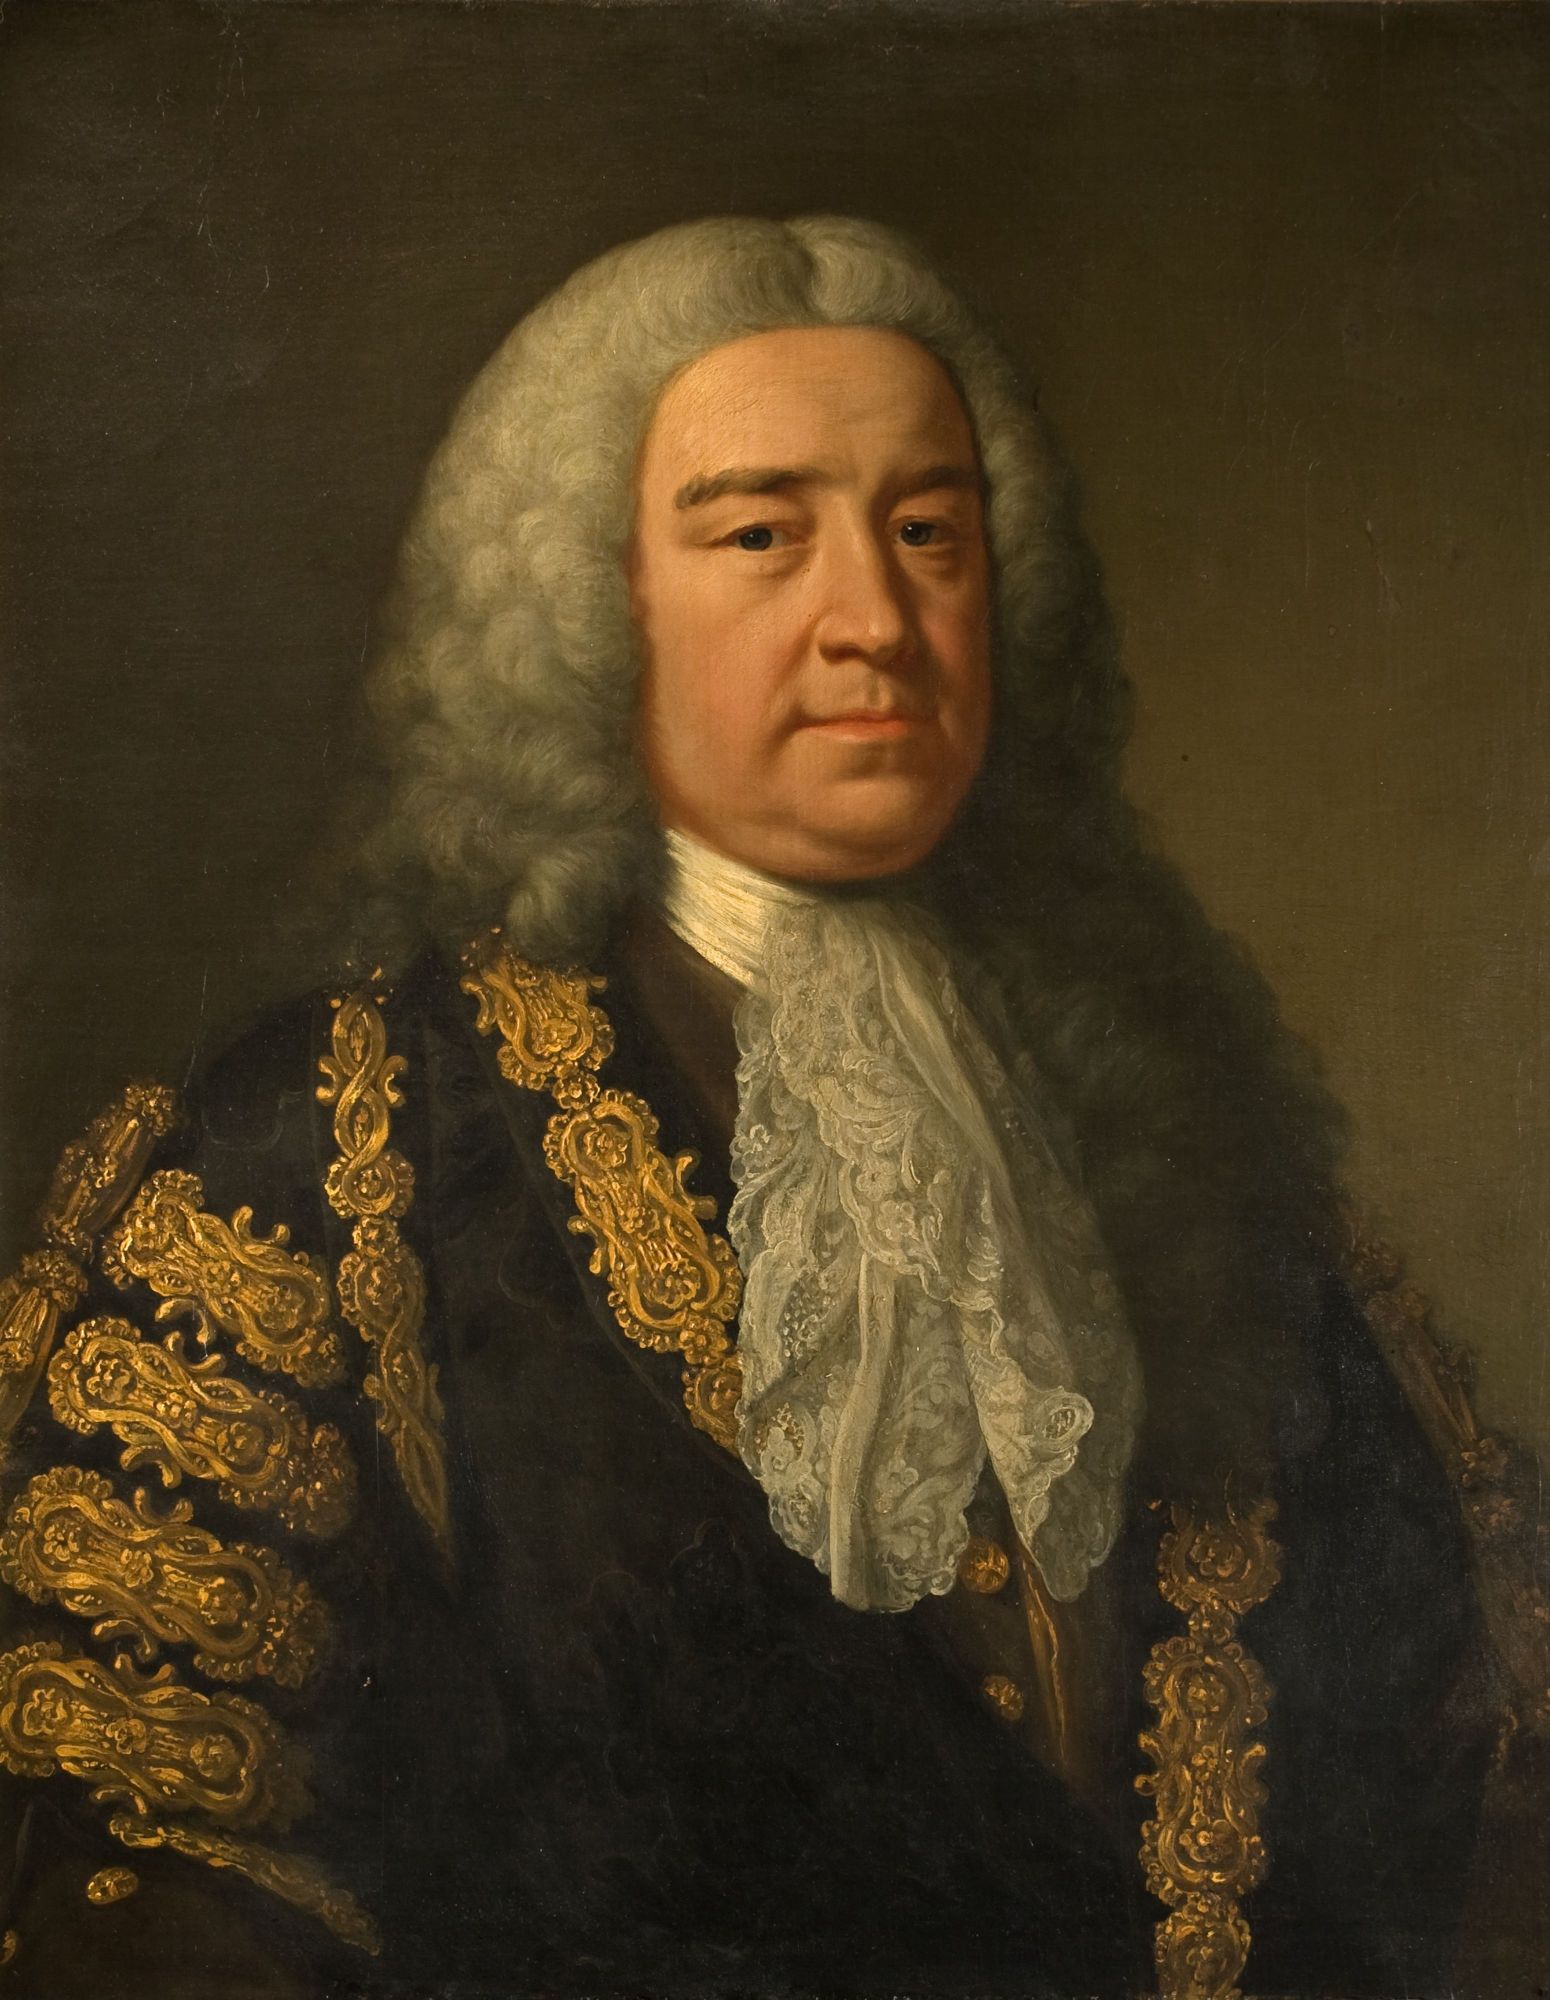 18th Century, people wore wigs